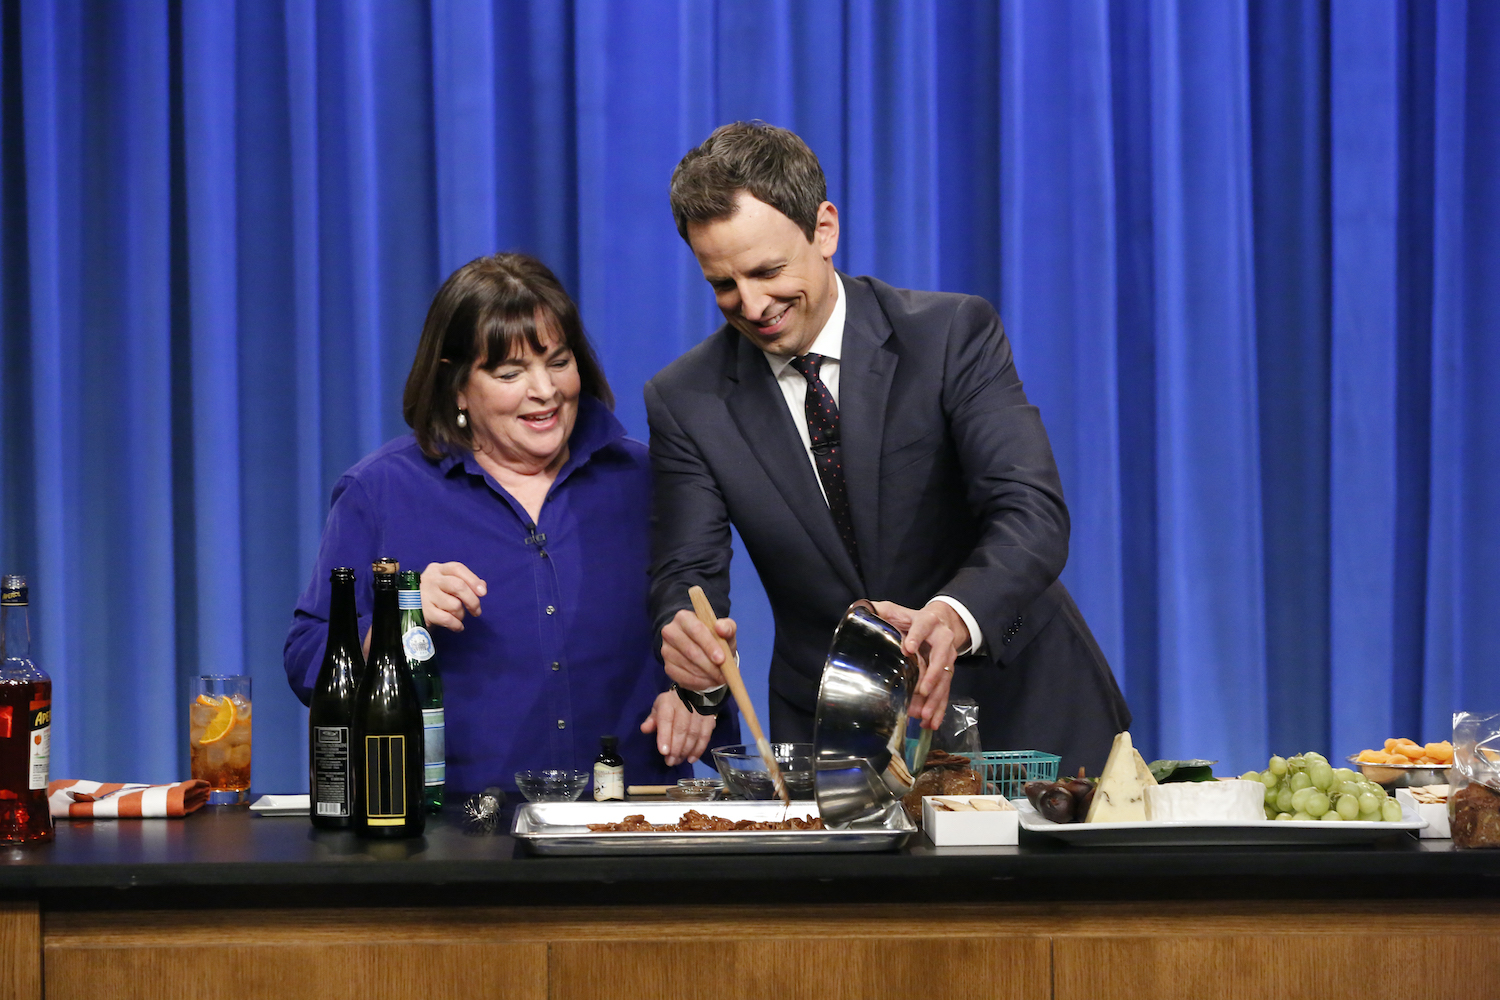 Ina Garten cooks with Seth Meyers during a cooking segment on Late Night With Seth Meyers